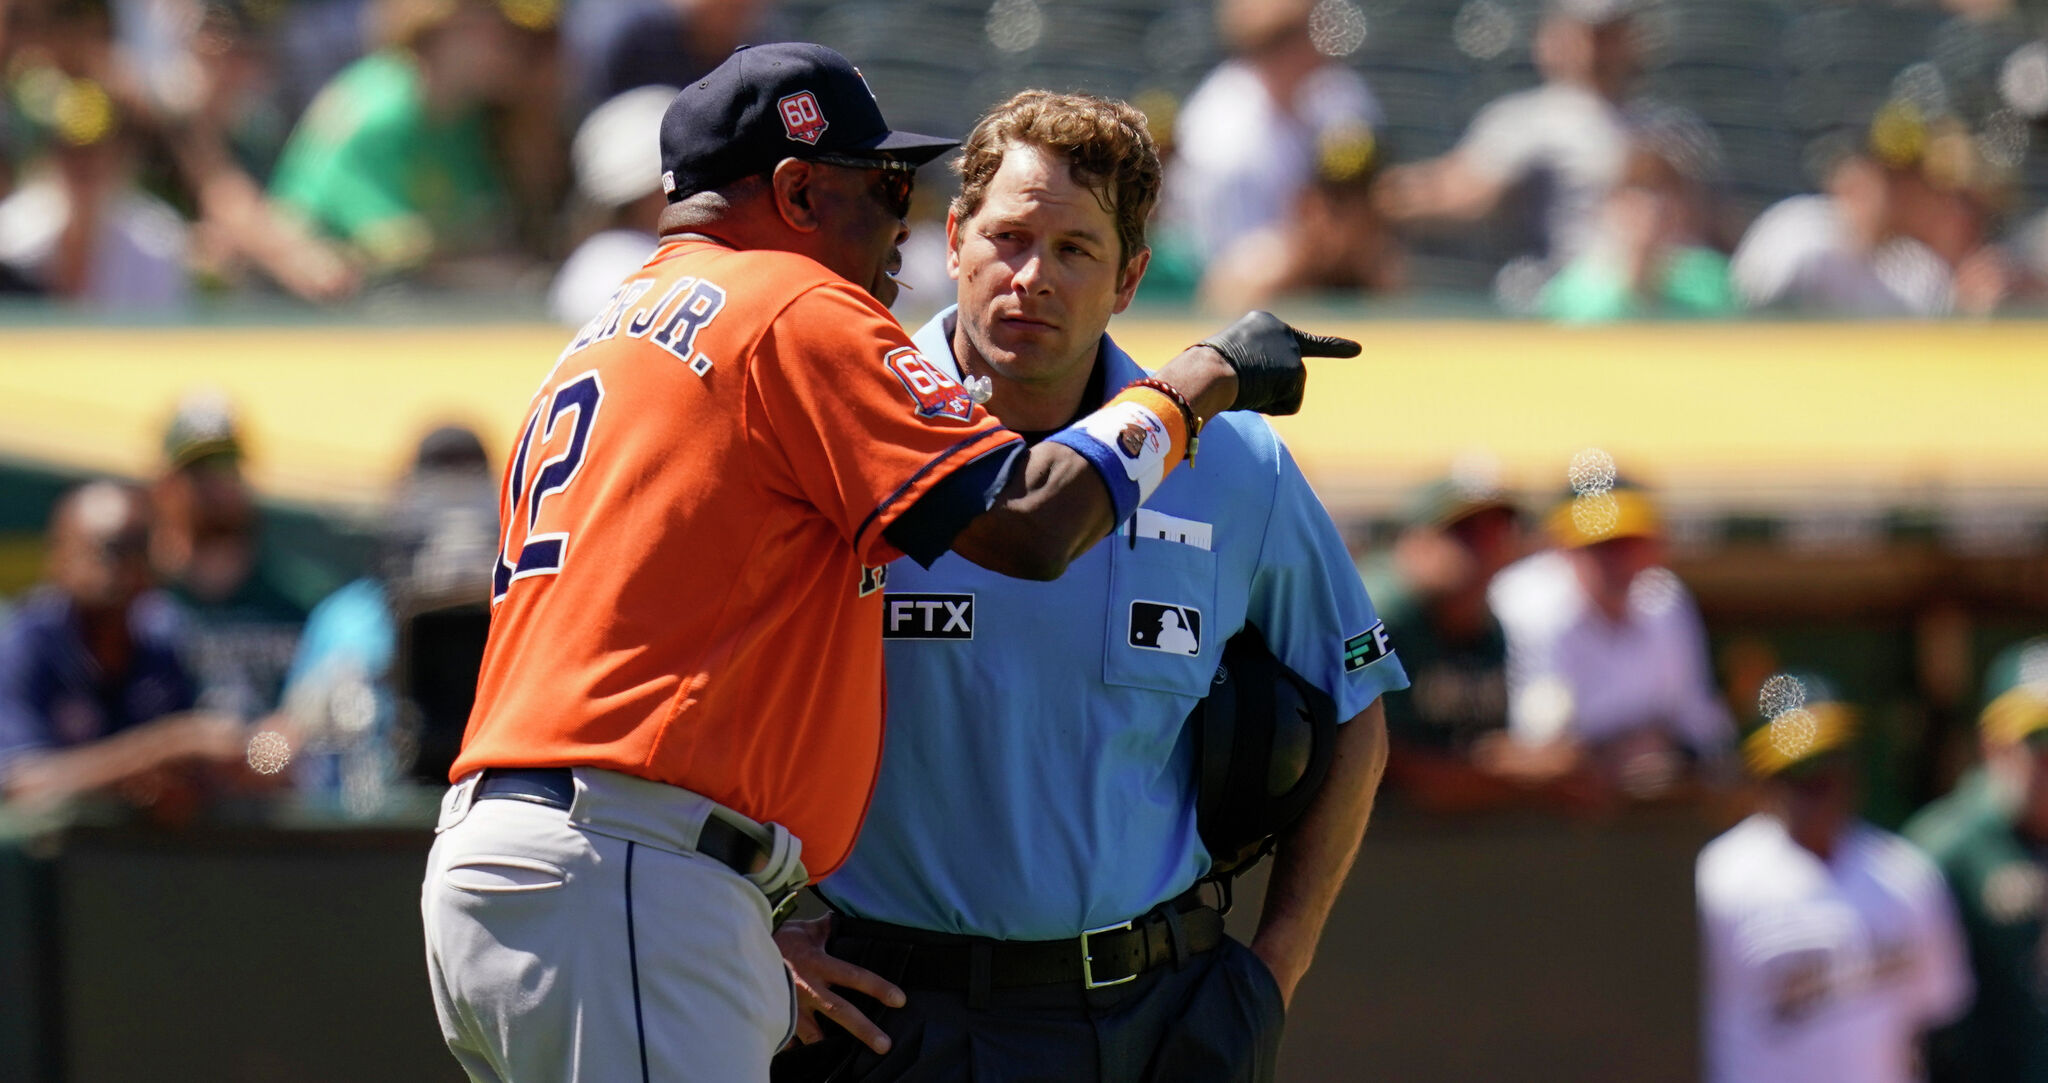 Jose Altuve earns first ejection for arguing strike zone in Astros' loss